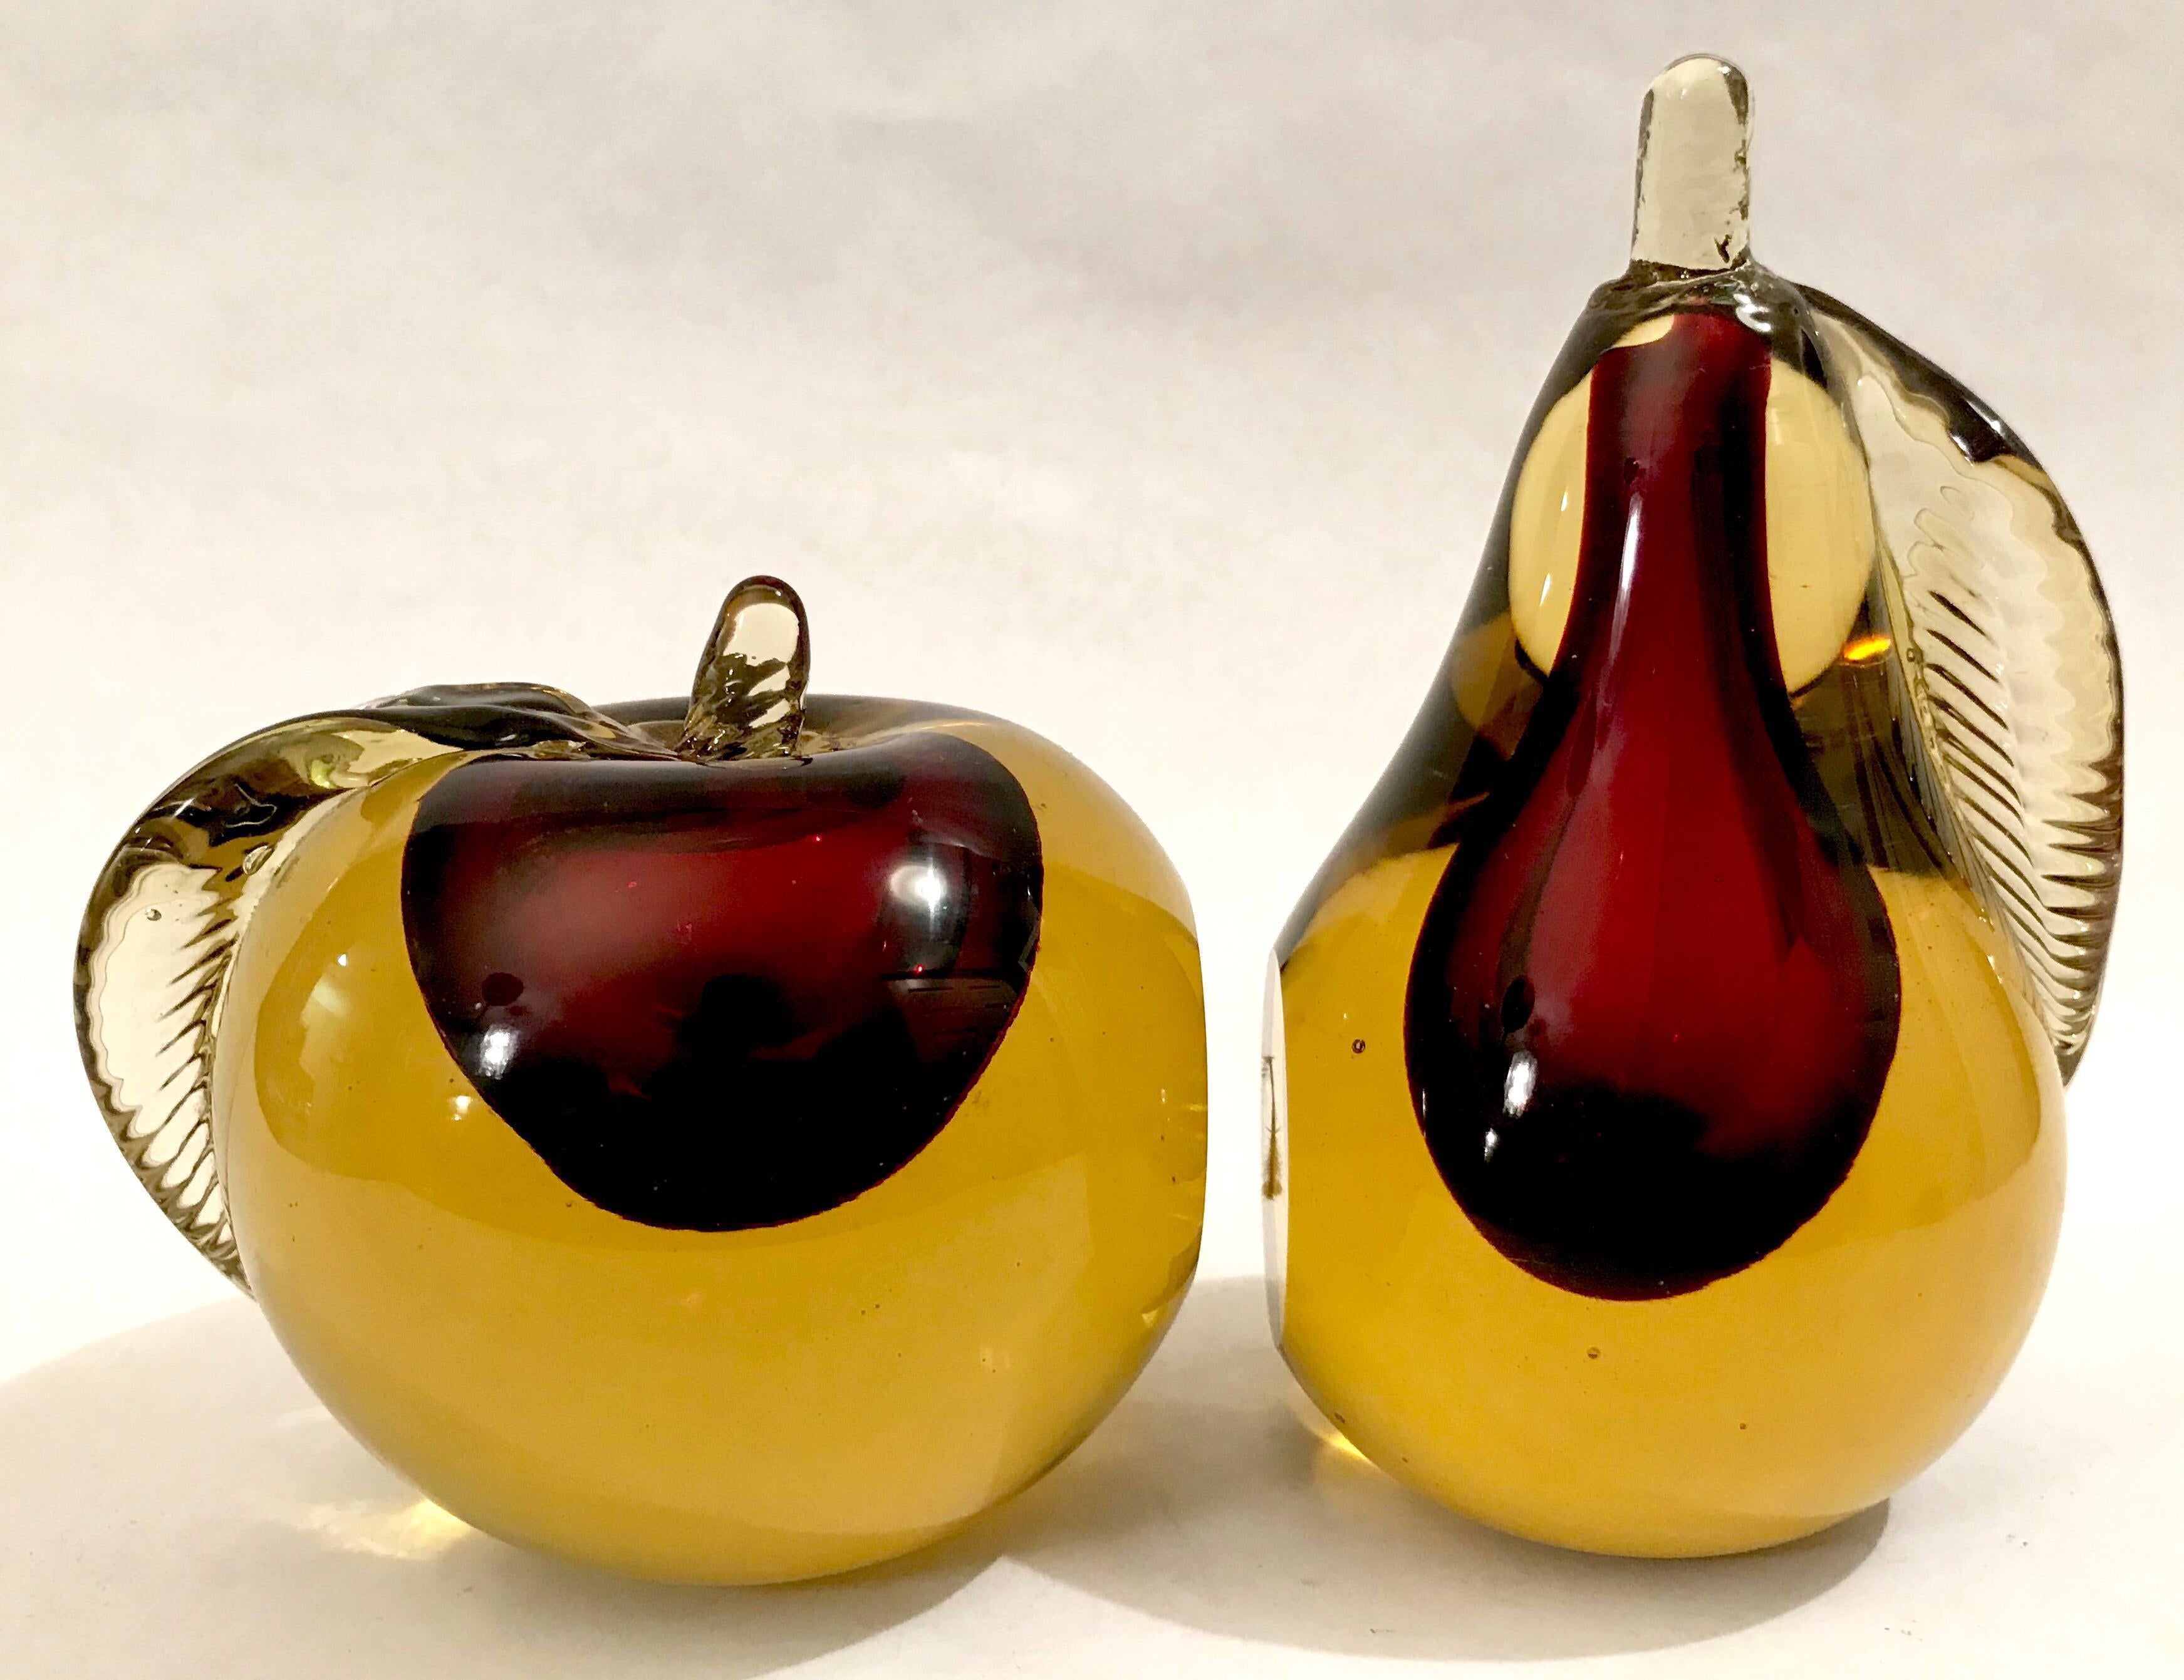 Murano Sommerso art glass apple and pear bookends, Italy, 1960s.
       